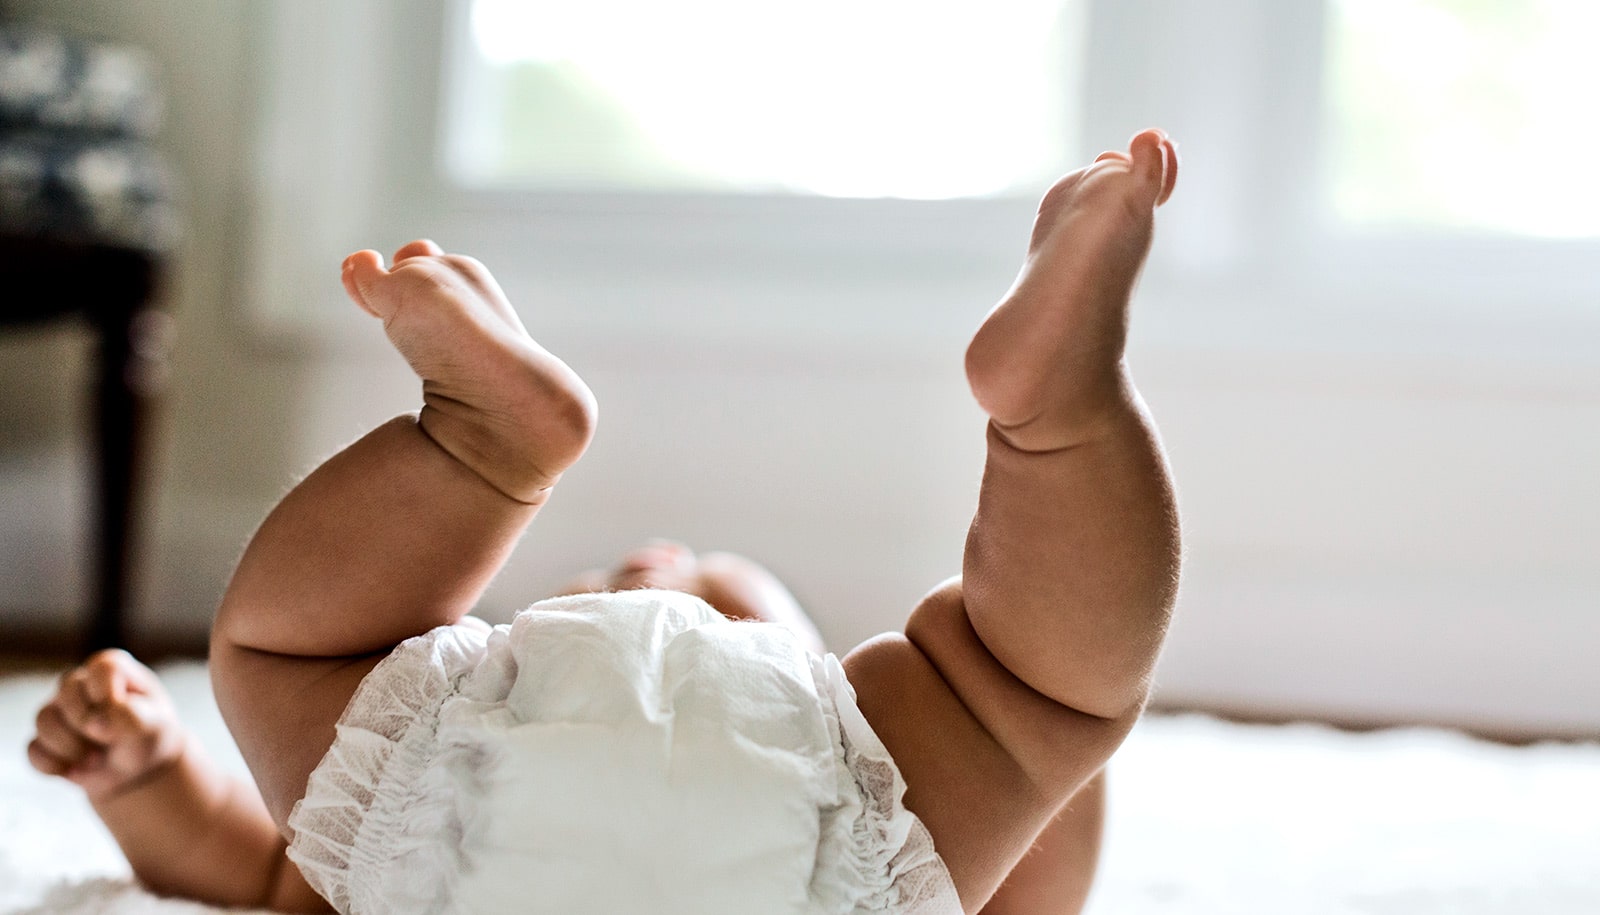 A baby wearing a diaper holds its legs in the air.